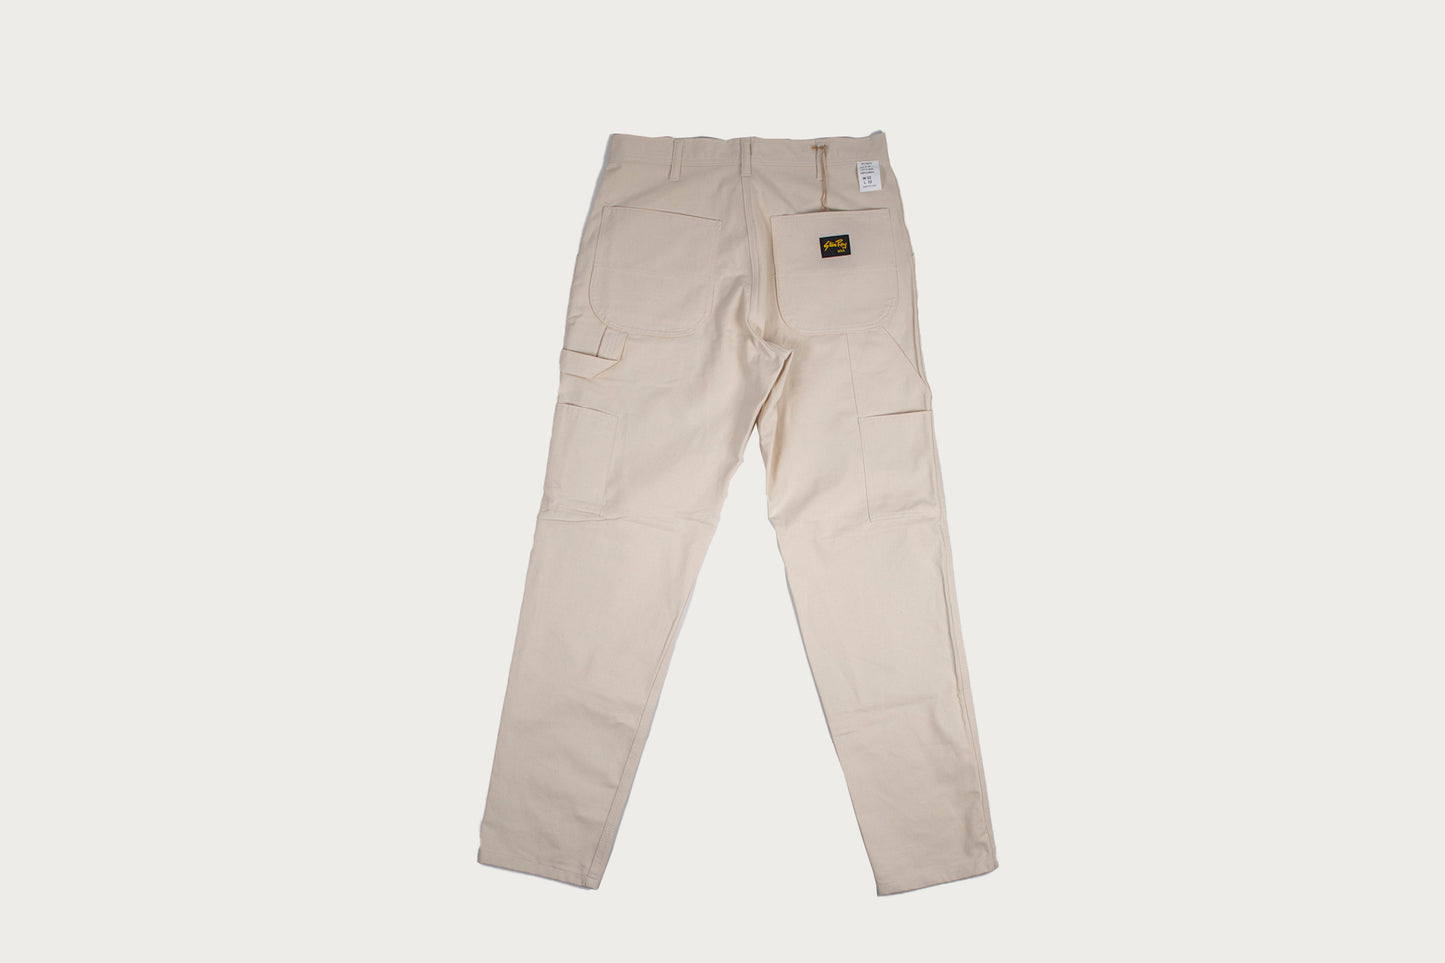 Stan Ray Natural Twill Painter's Pants 80s Fit